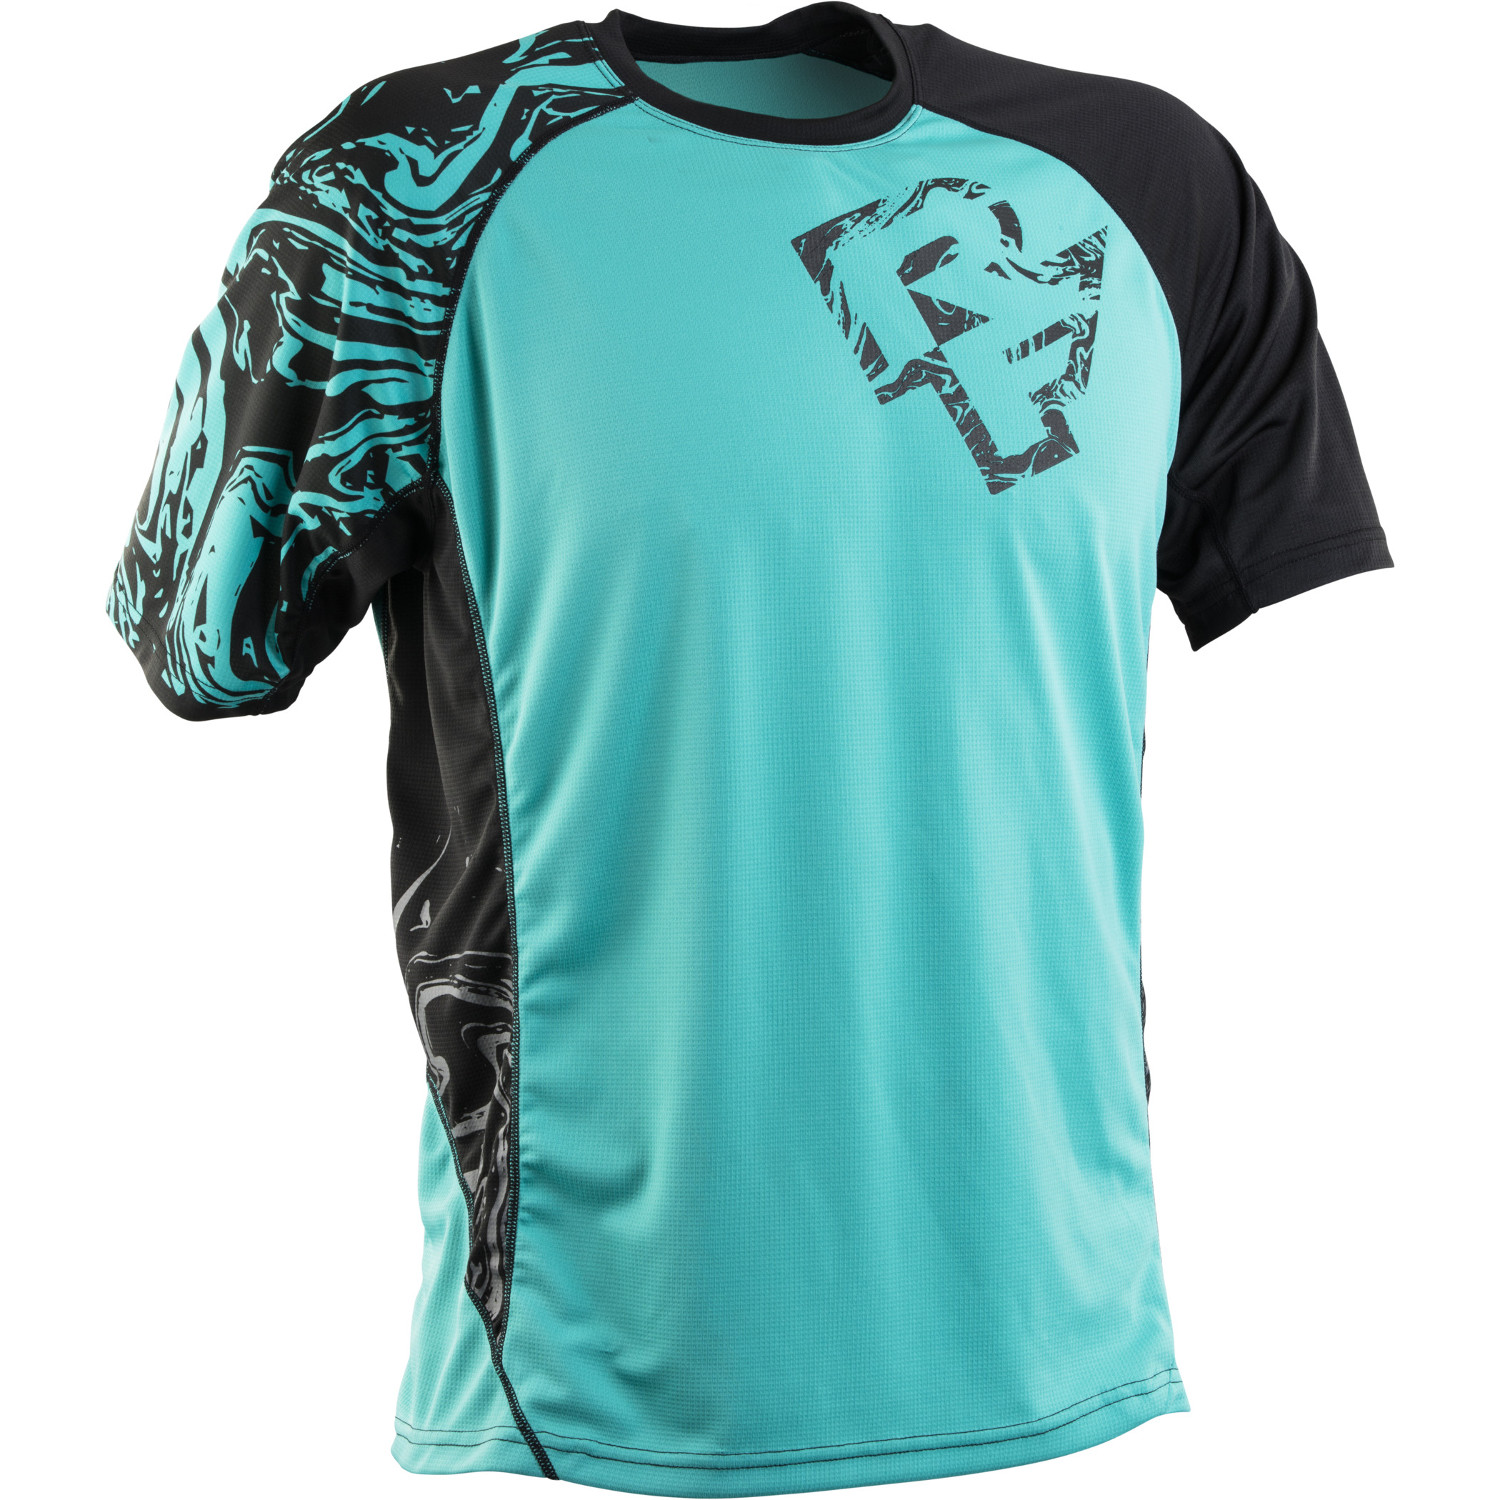 Race Face Maillot VTT Manches Courtes Indy Turquoise/Black